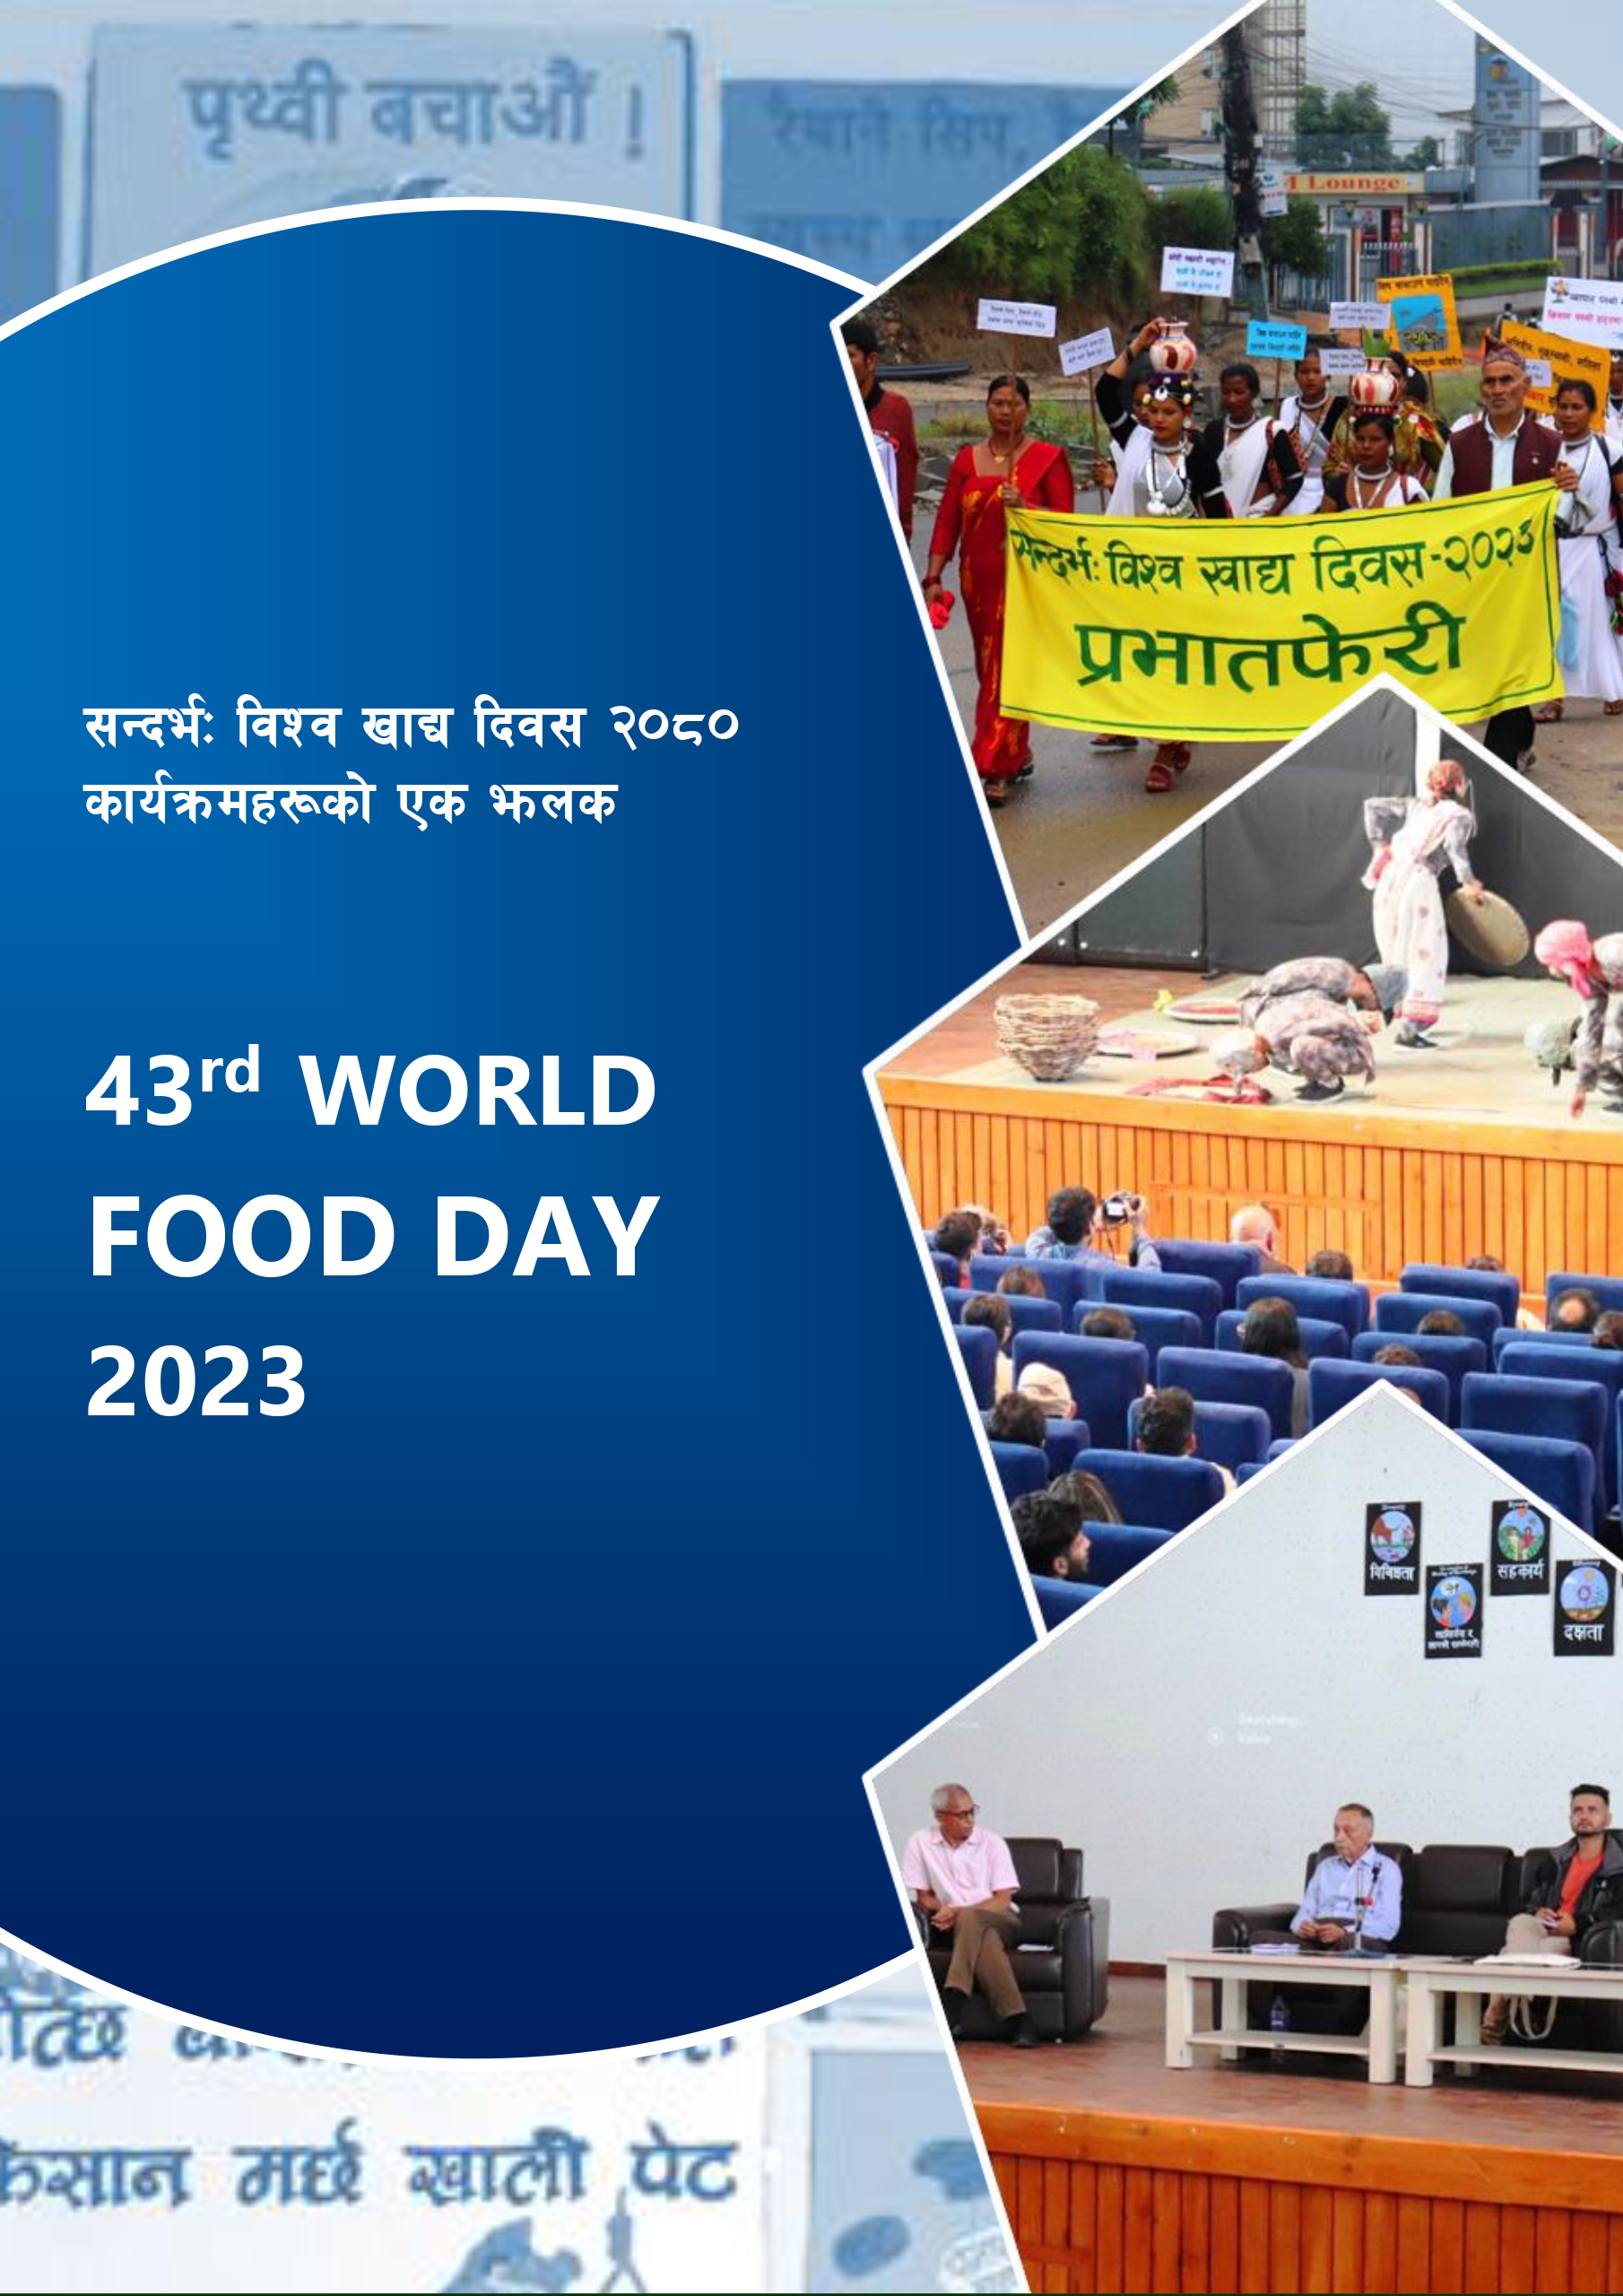 43rd WORLD FOOD DAY 2023